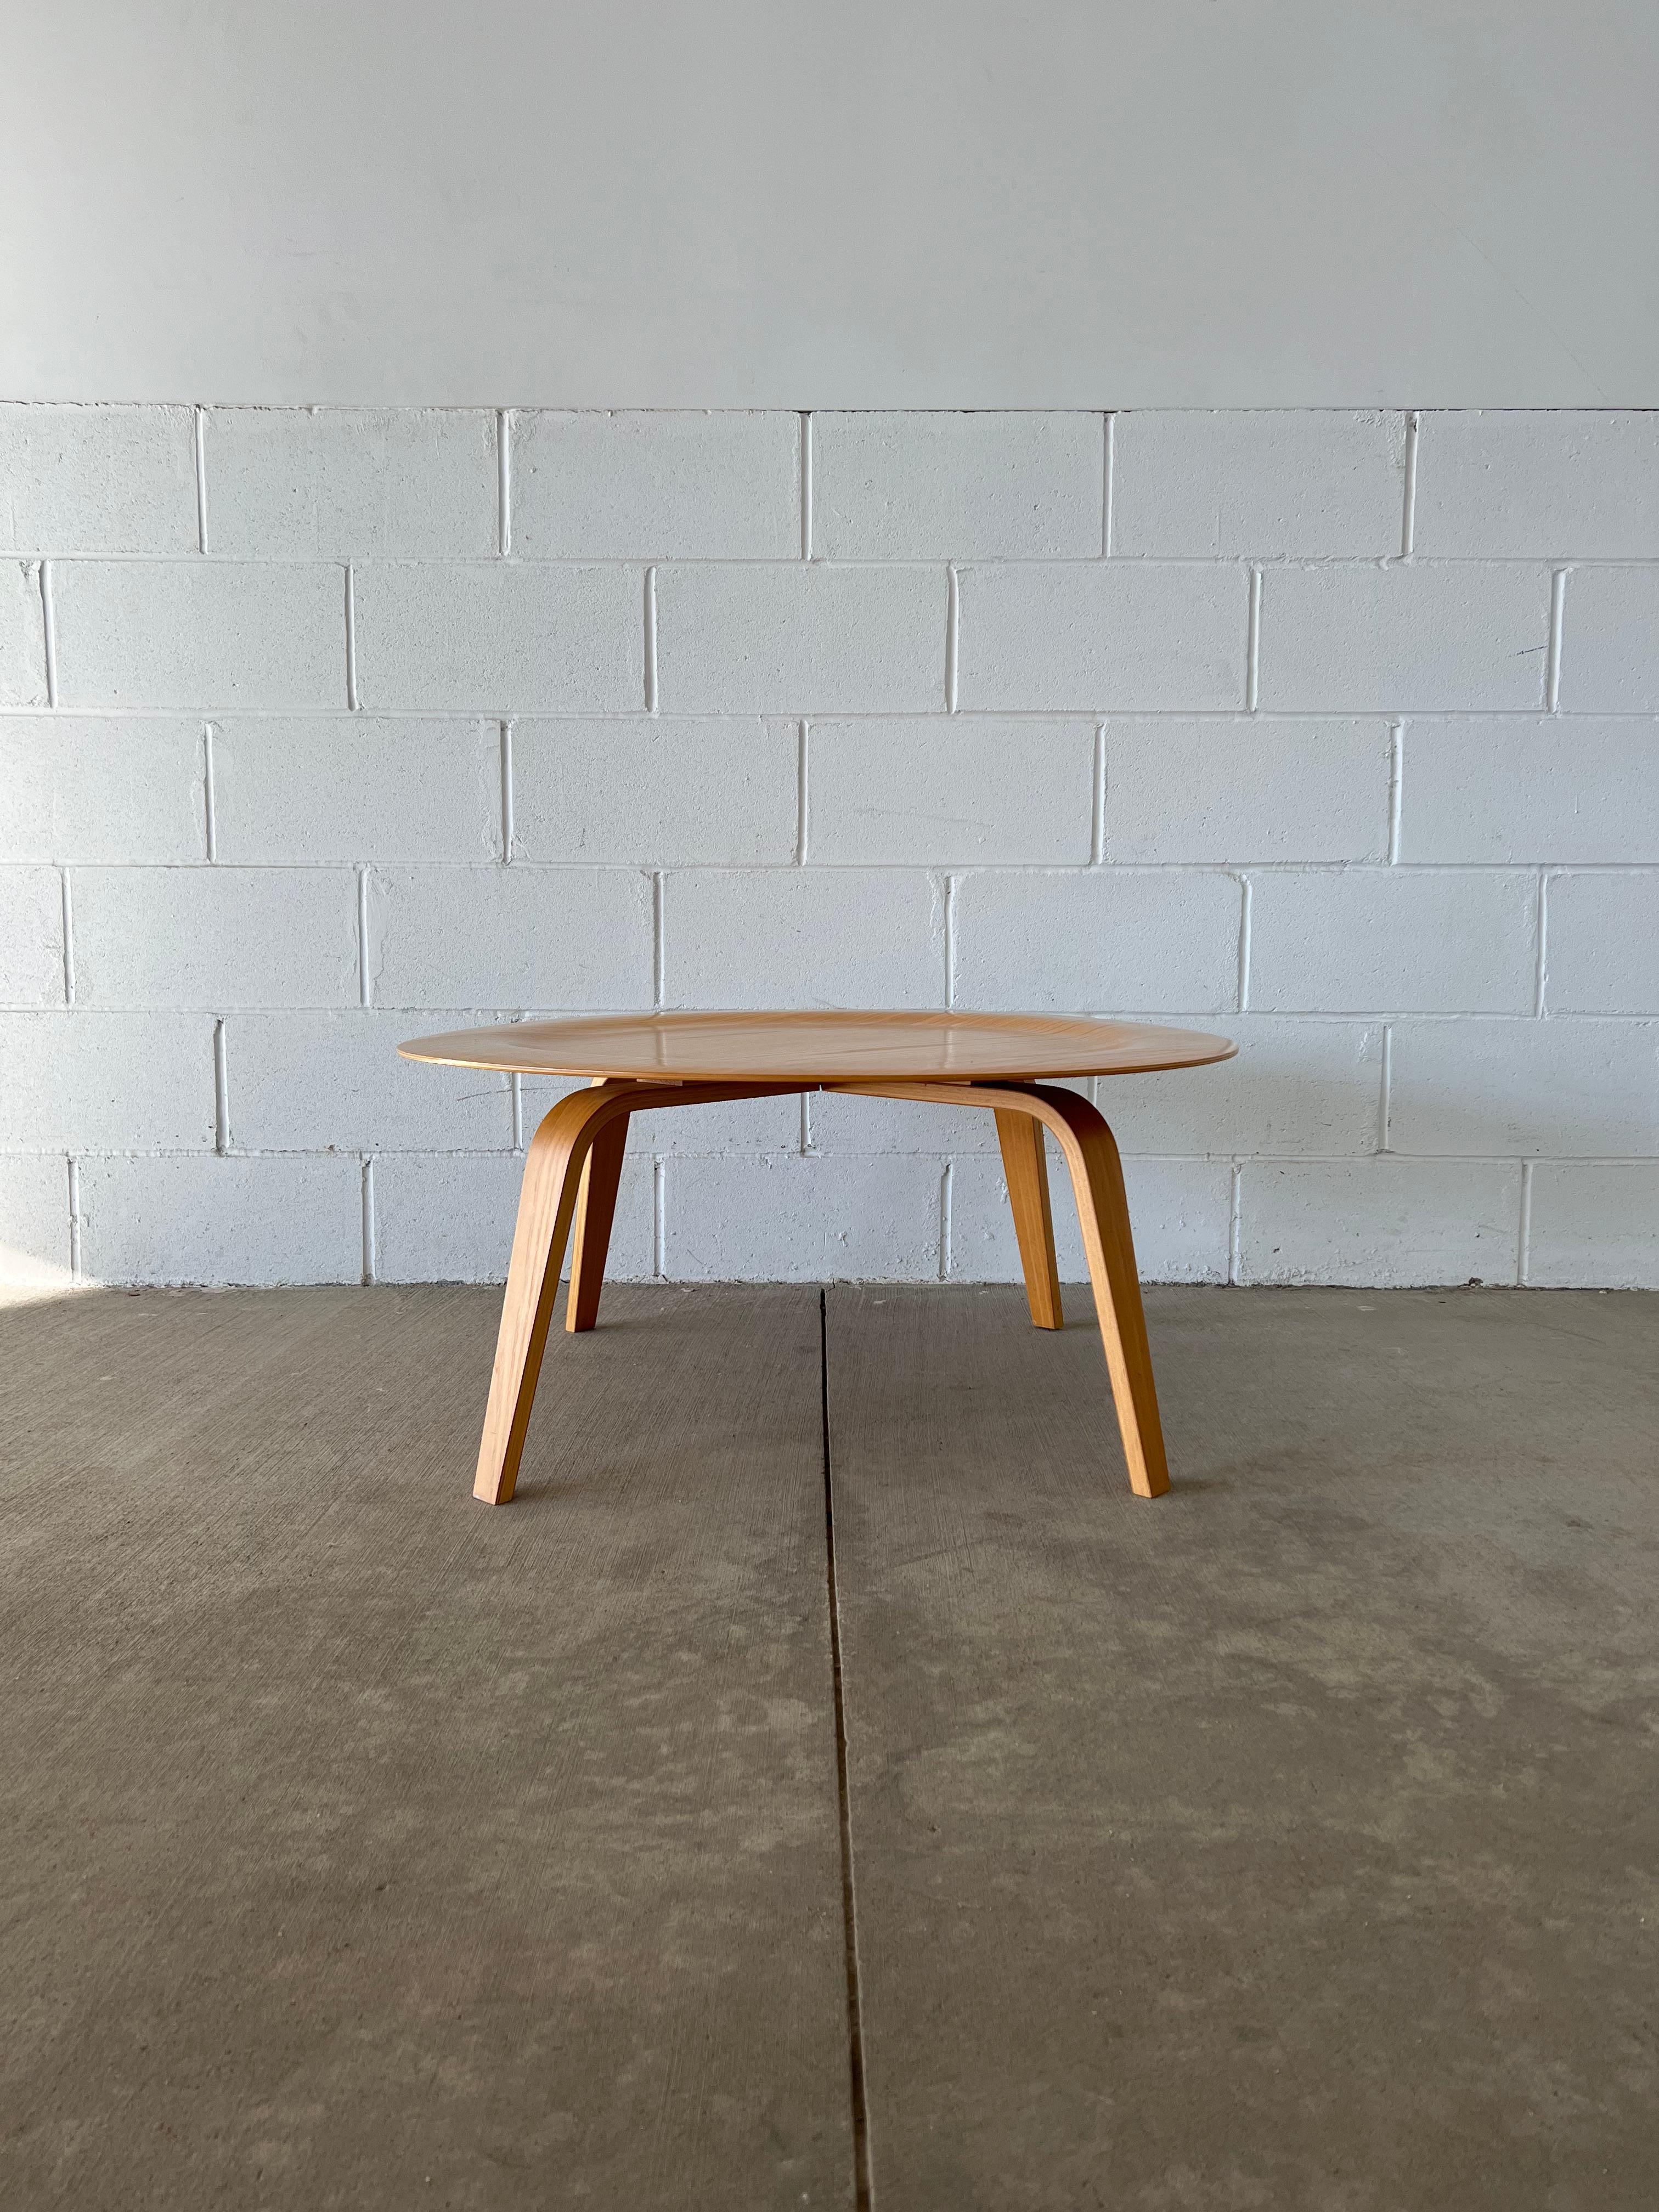 Like a UFO straight out of the space age, the coffee table wood (CTW) by Charles and Ray Eames captured the playfulness and innovation of their design work.

This example is in ash and from the 4th generation of CTWs judging by the design details